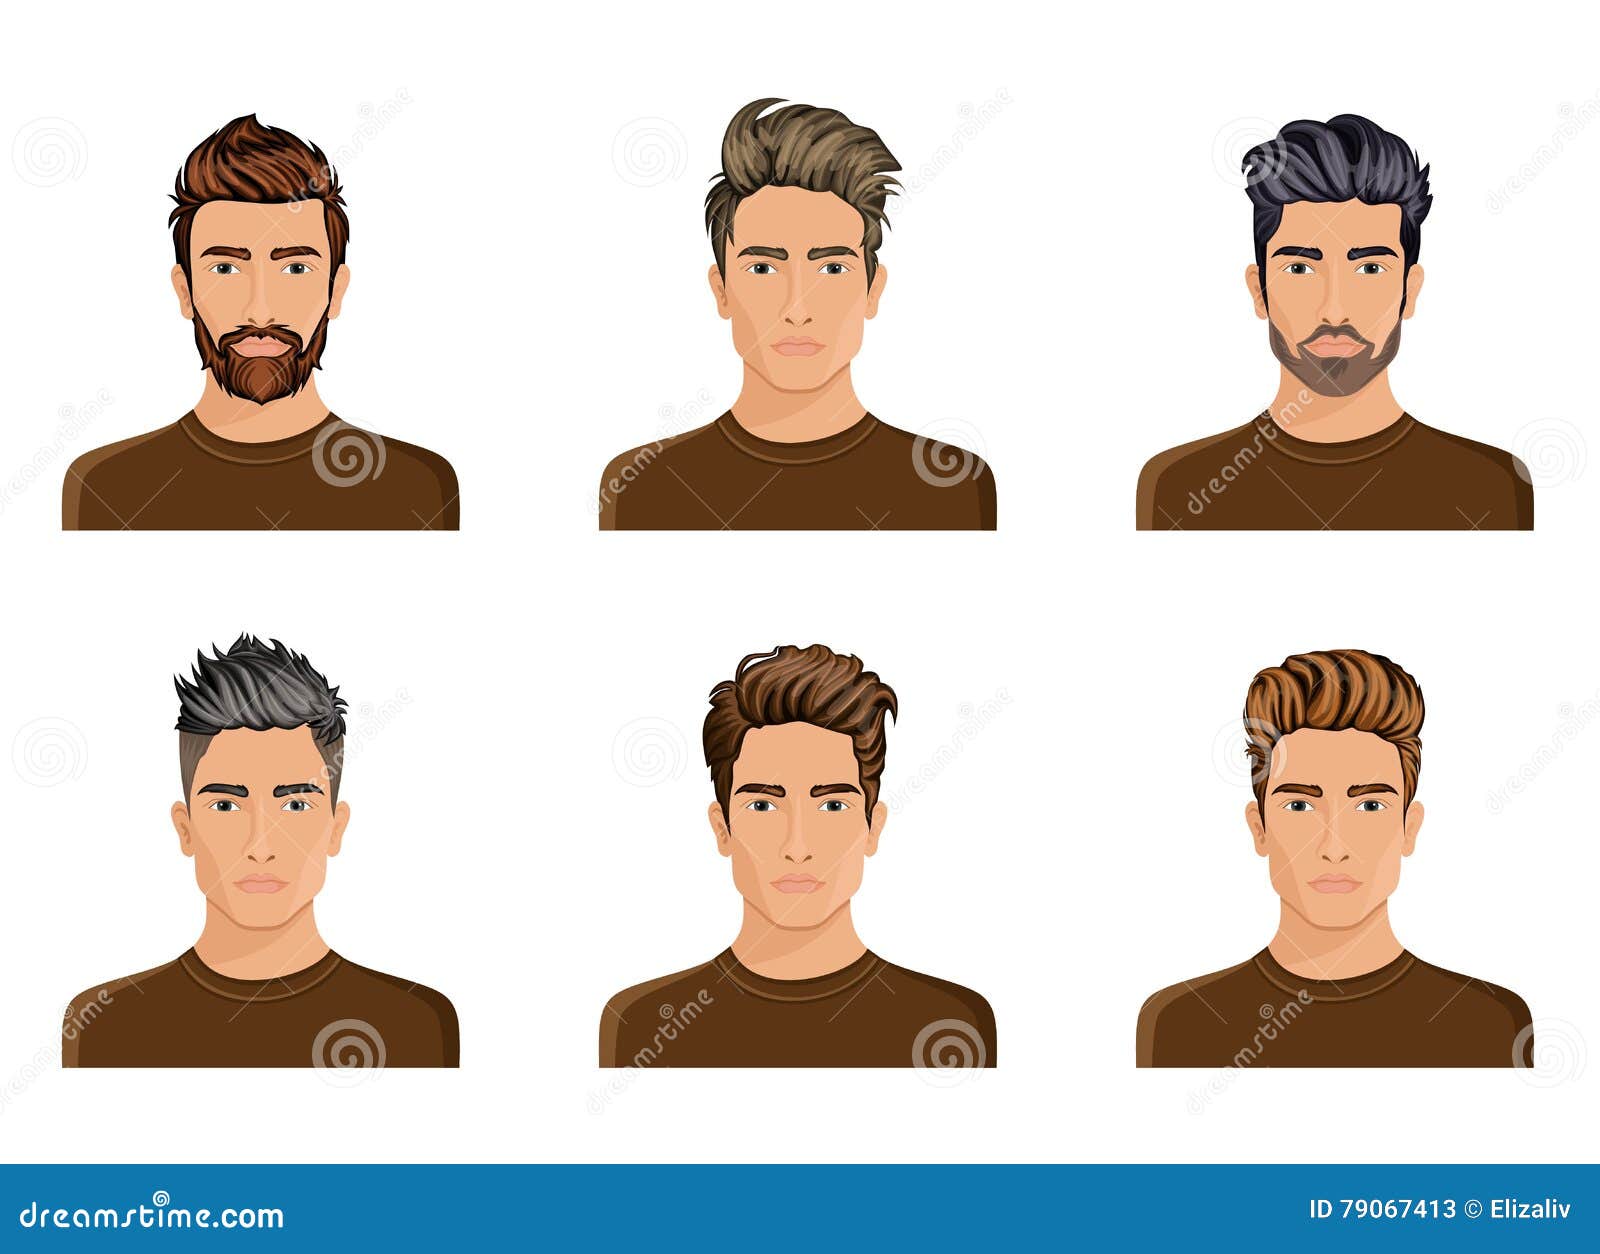 Men Used To Create the Hair Style of the Character Beard, Mustache Men  Fashion, Image Stock Vector - Illustration of business, black: 79067413